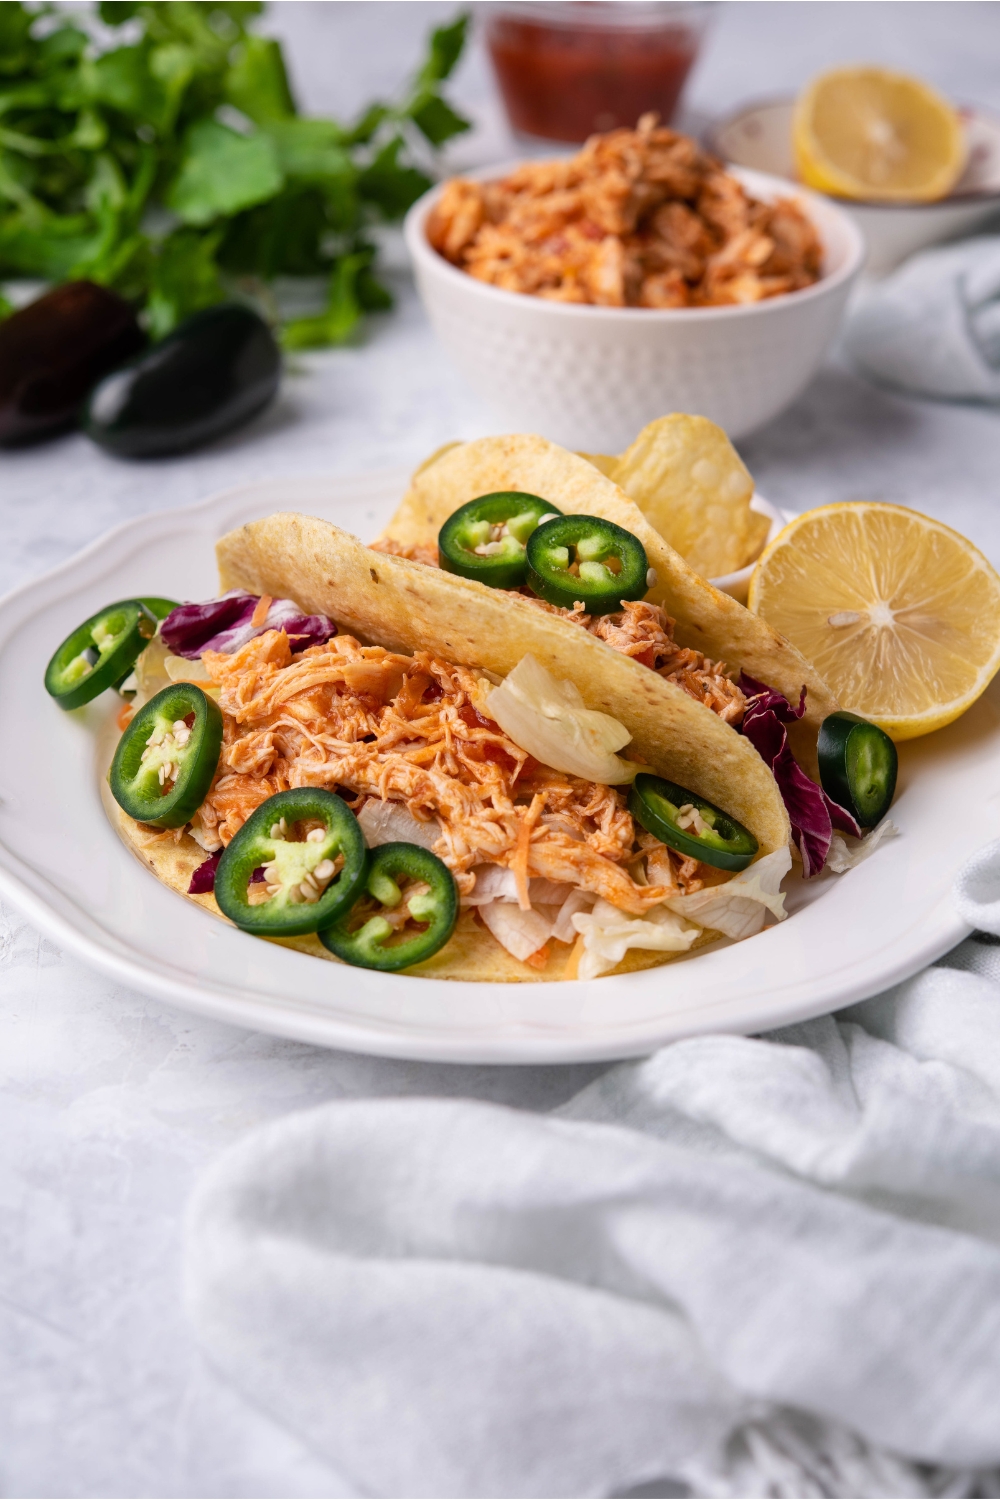 Crockpot salsa chicken shredded in two tacos dressed with sliced jalapeños and shredded cabbage. There is a halved lemon on the plate and a bowl of shredded salsa chicken in the background.